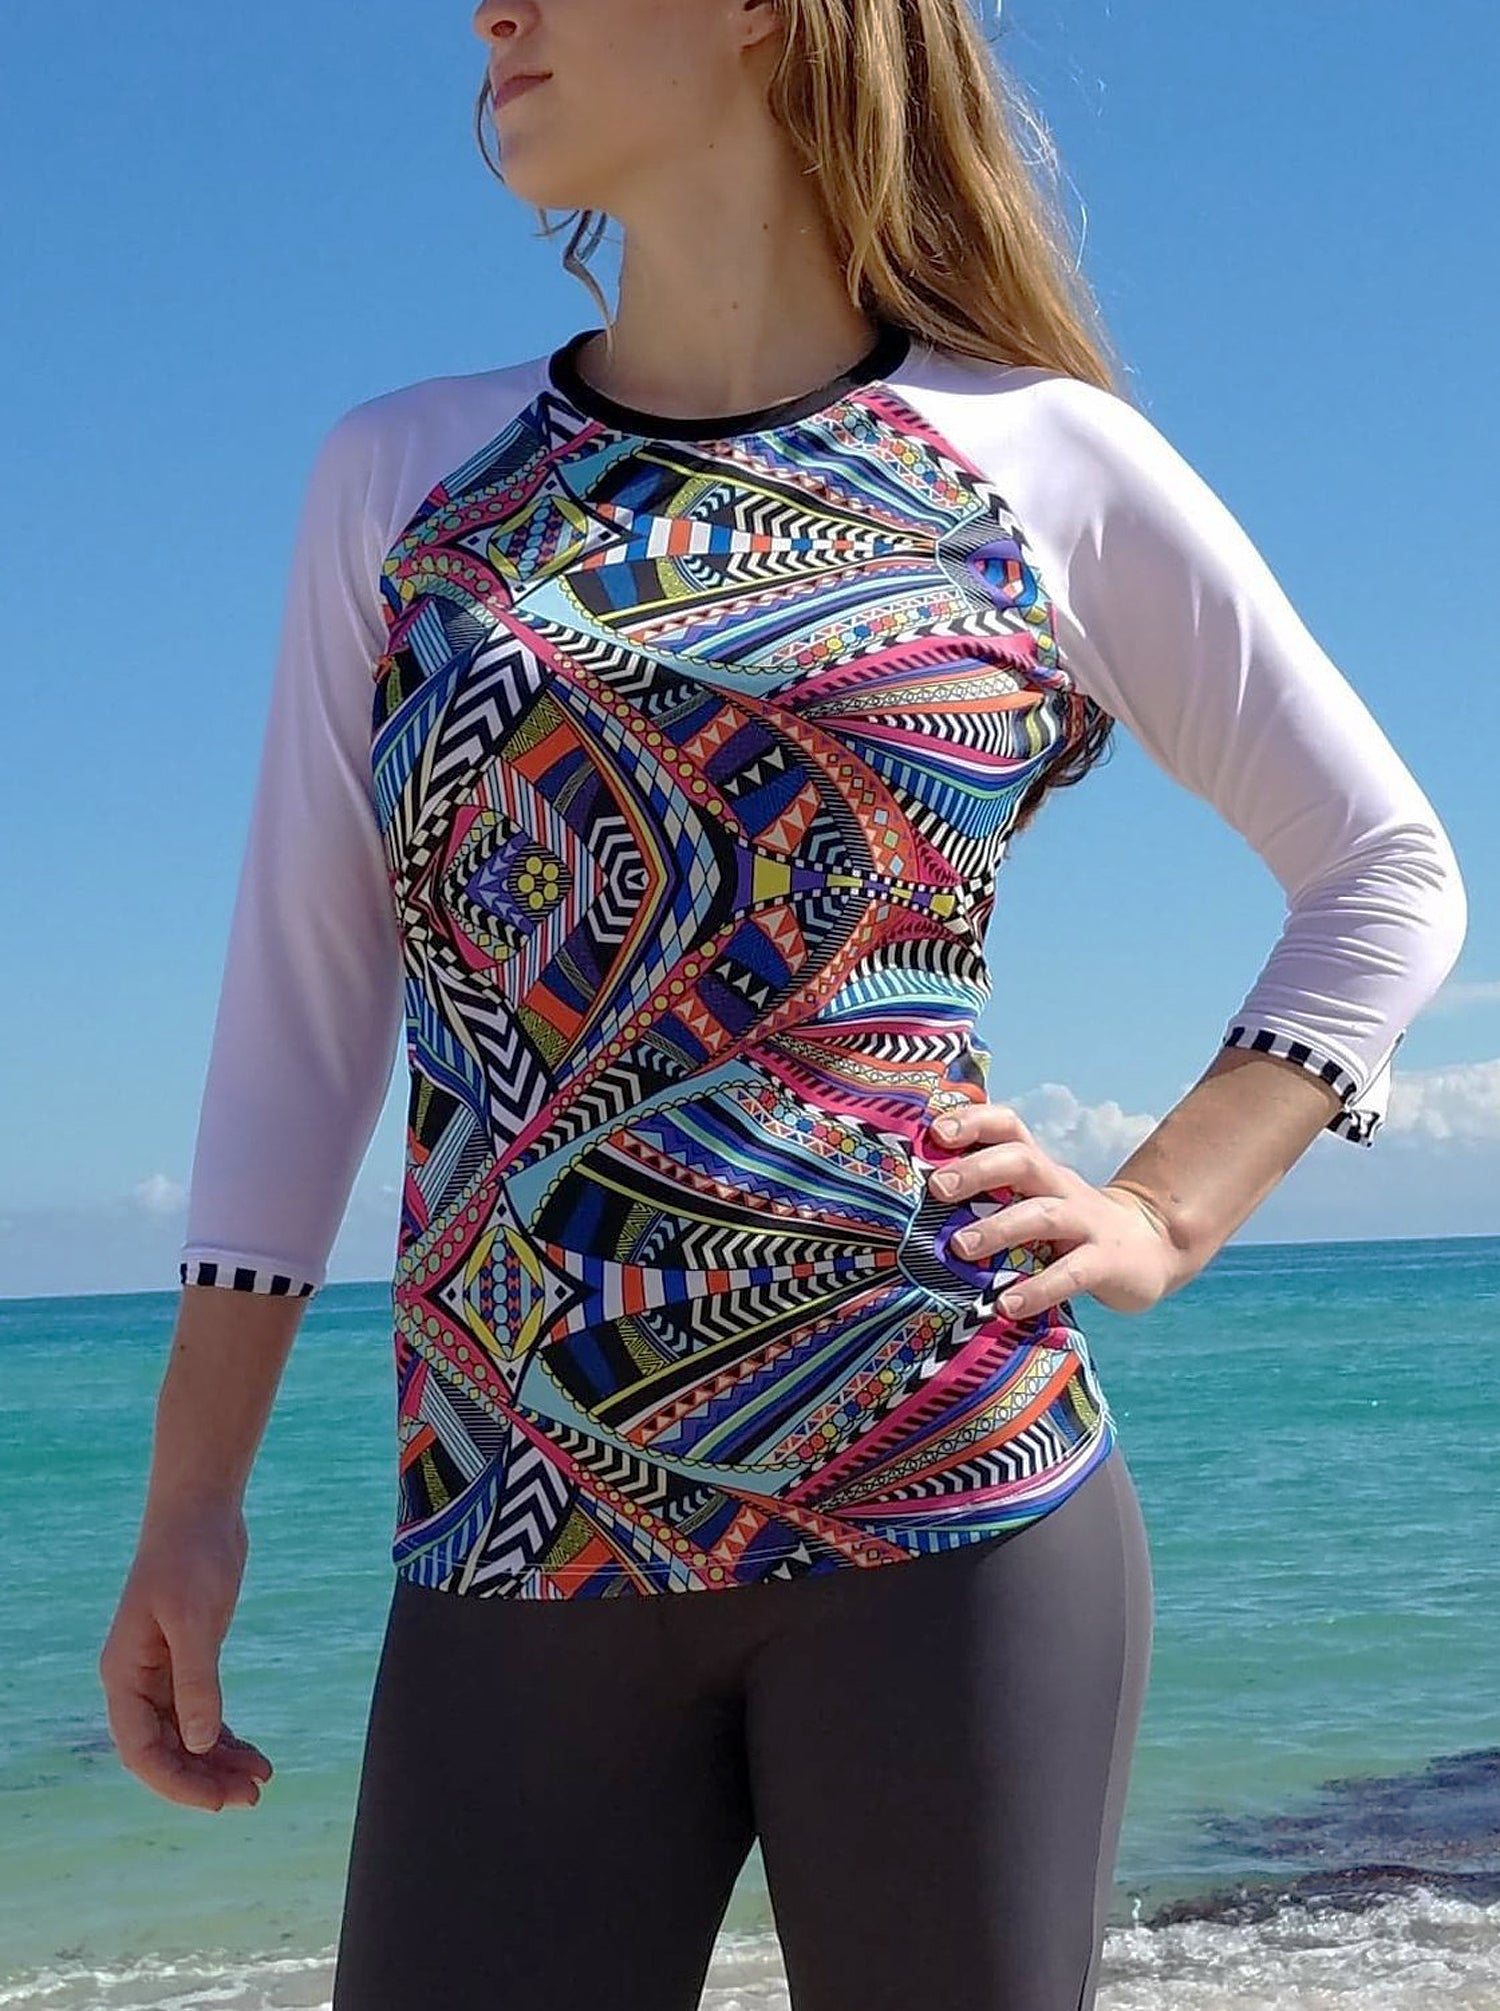 Women's modest long sleeve swim top in colorful print.